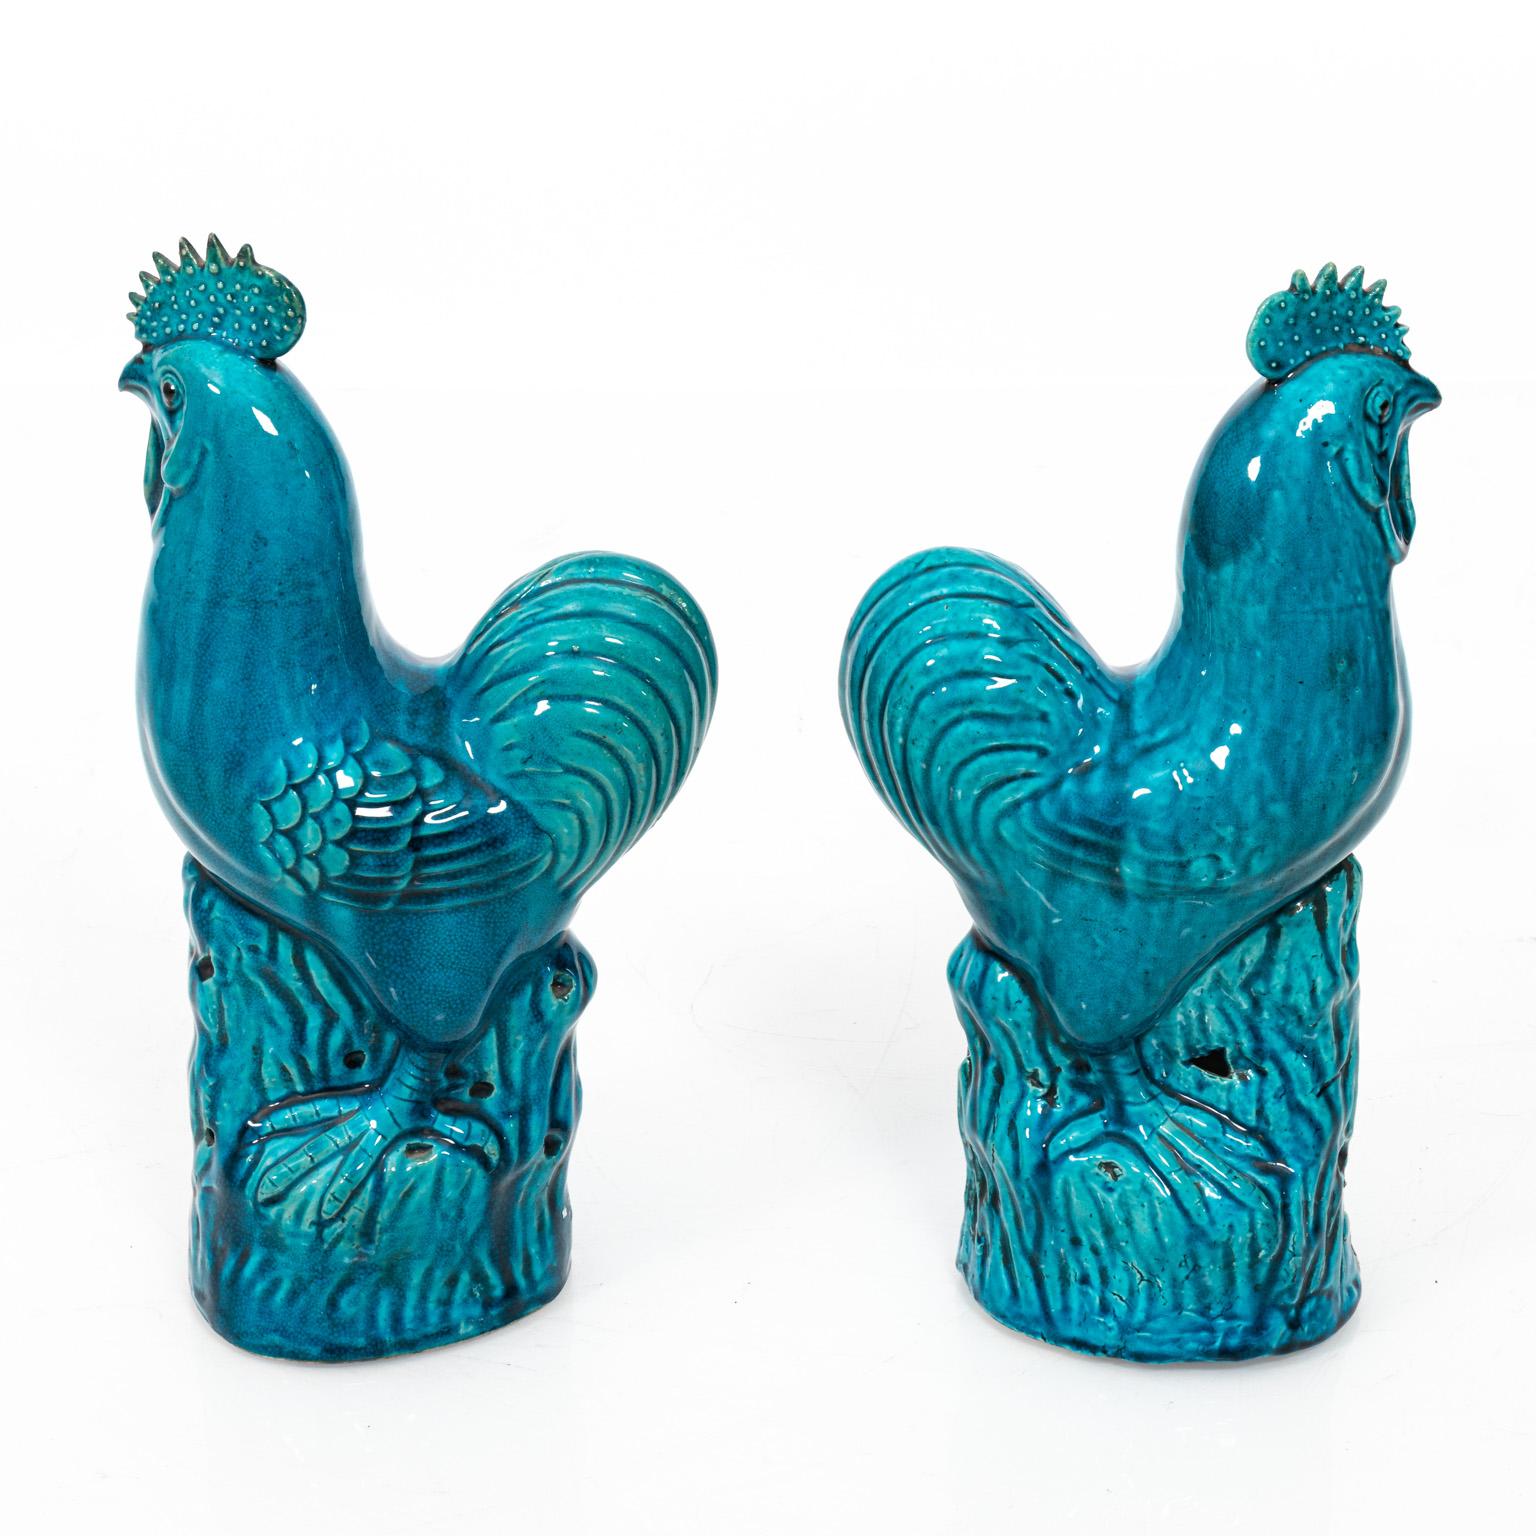 Pair of blue painted Chinese rooster statues. Please note of wear consistent with age including chips and minor paint loss.